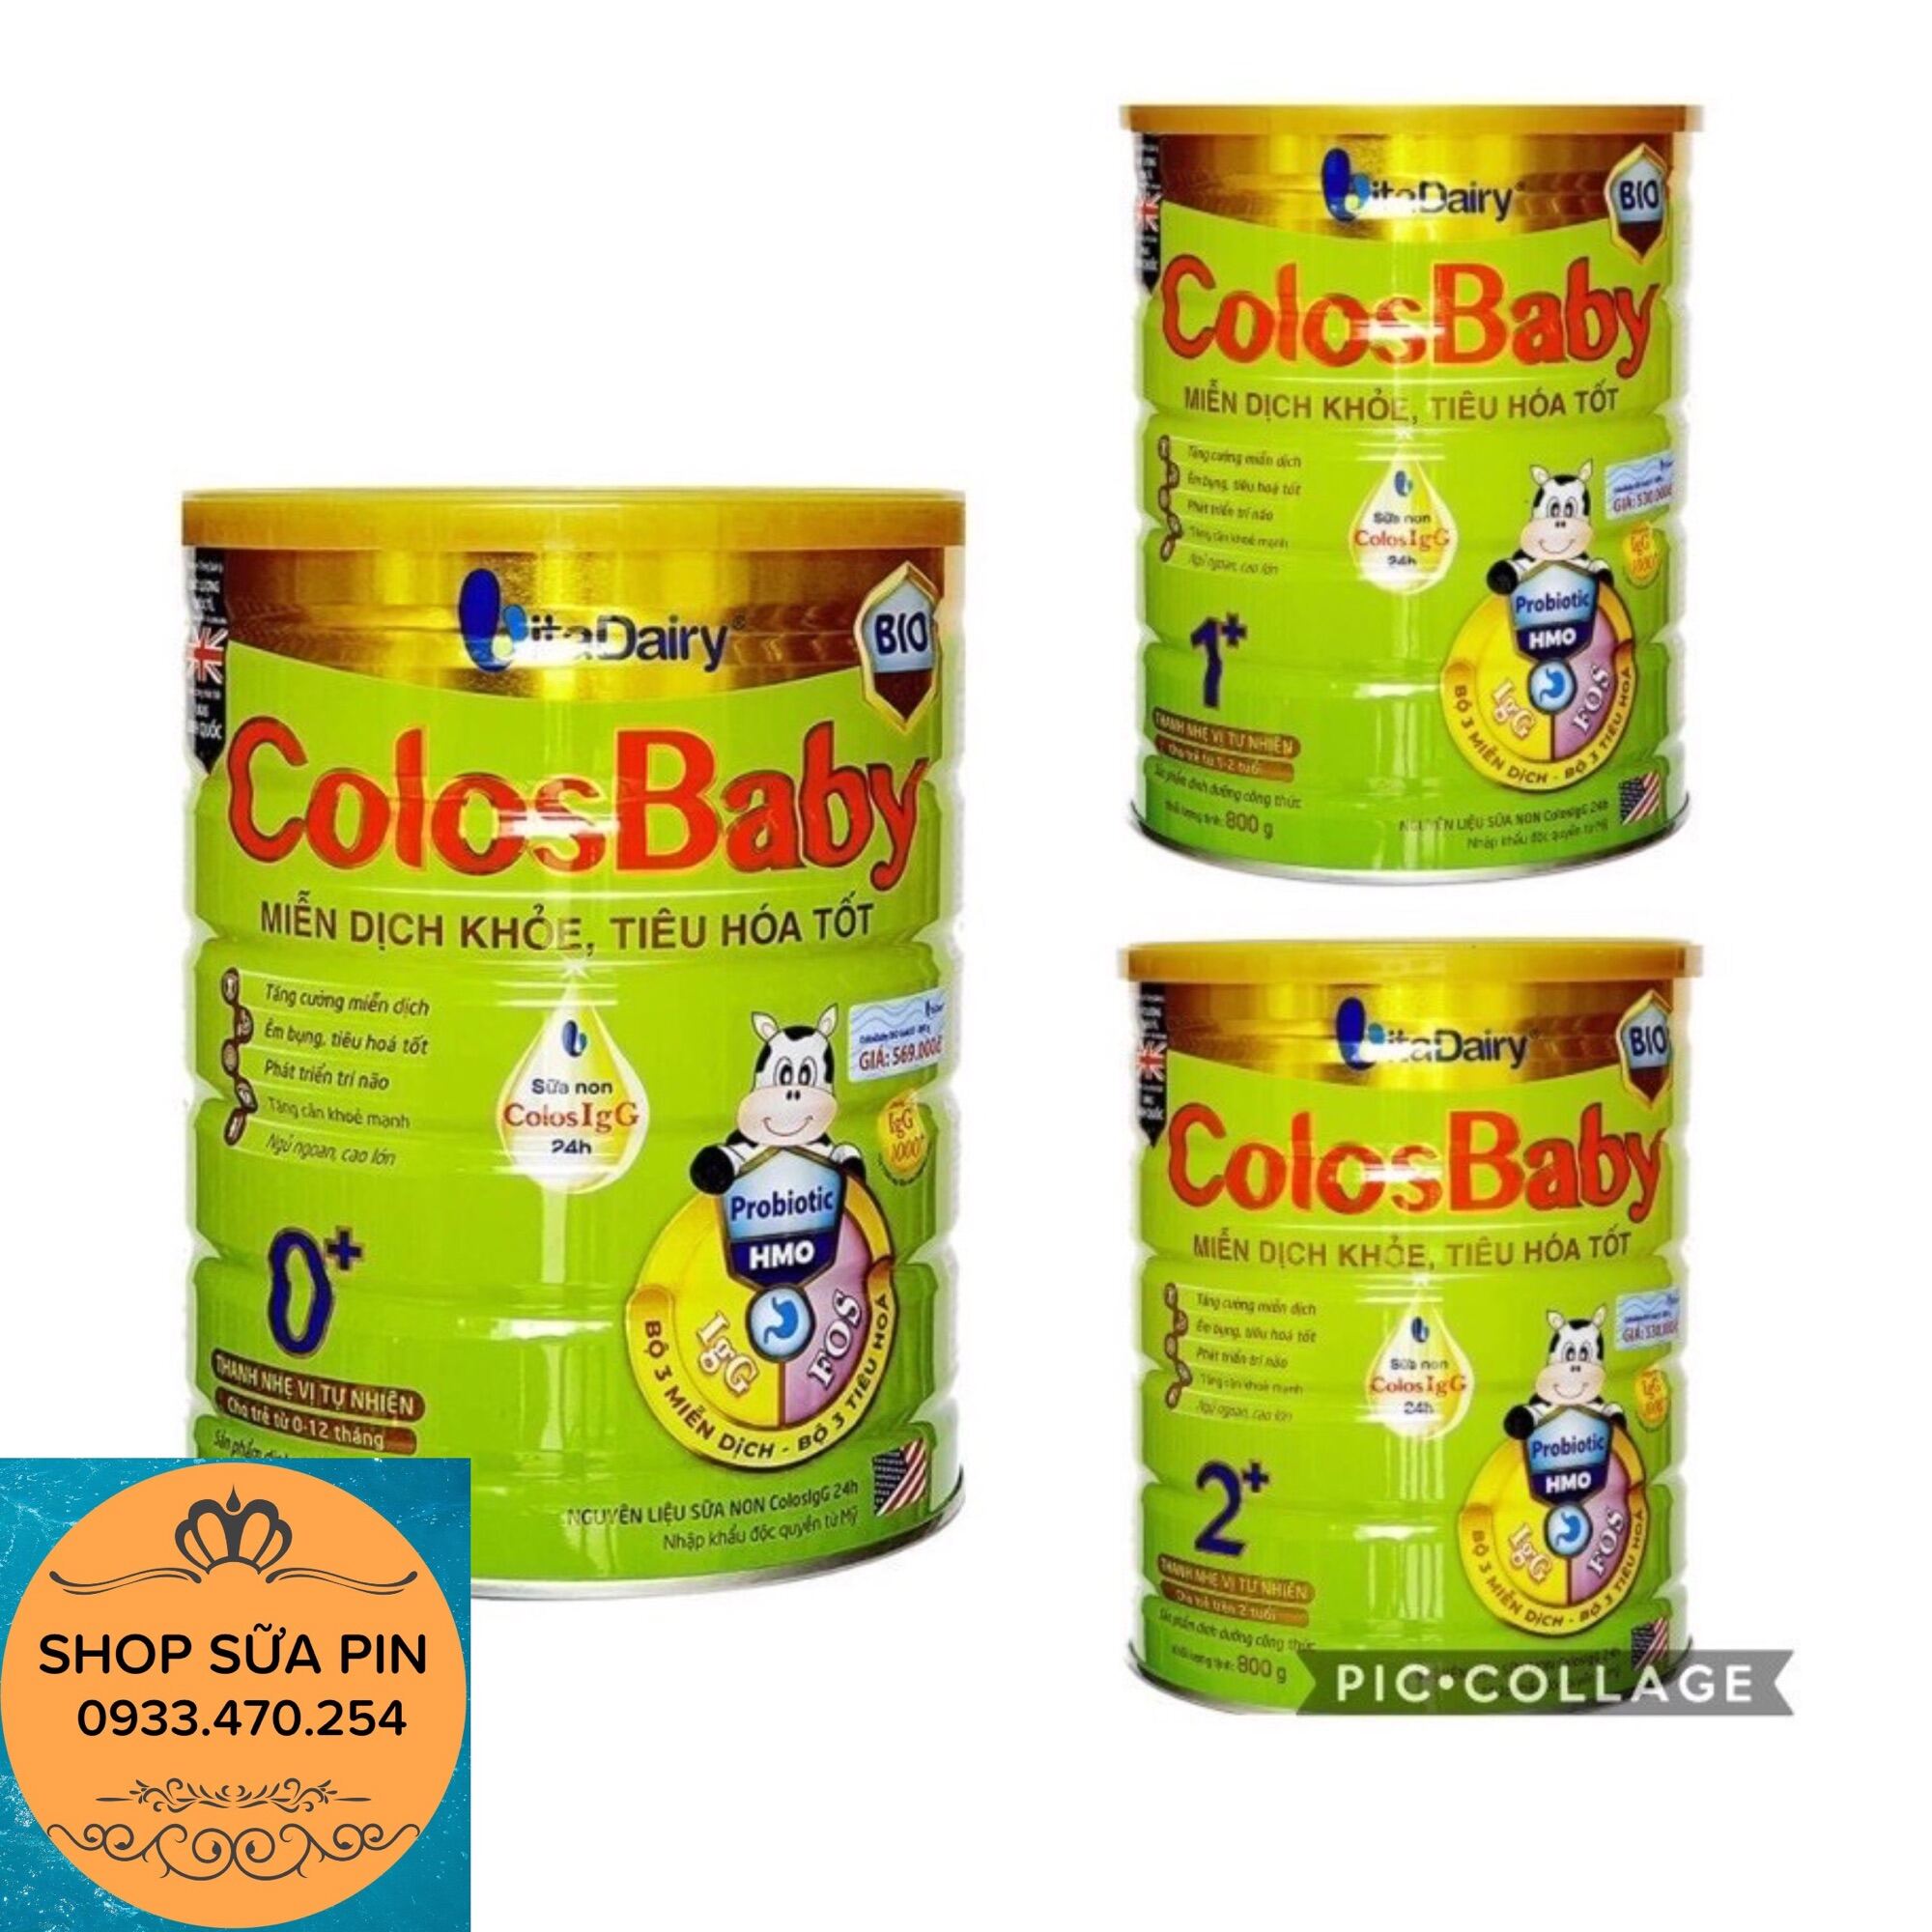 DATE MỚI Sữa bột Colosbaby BIO 0+, 1+, 2+ 800g